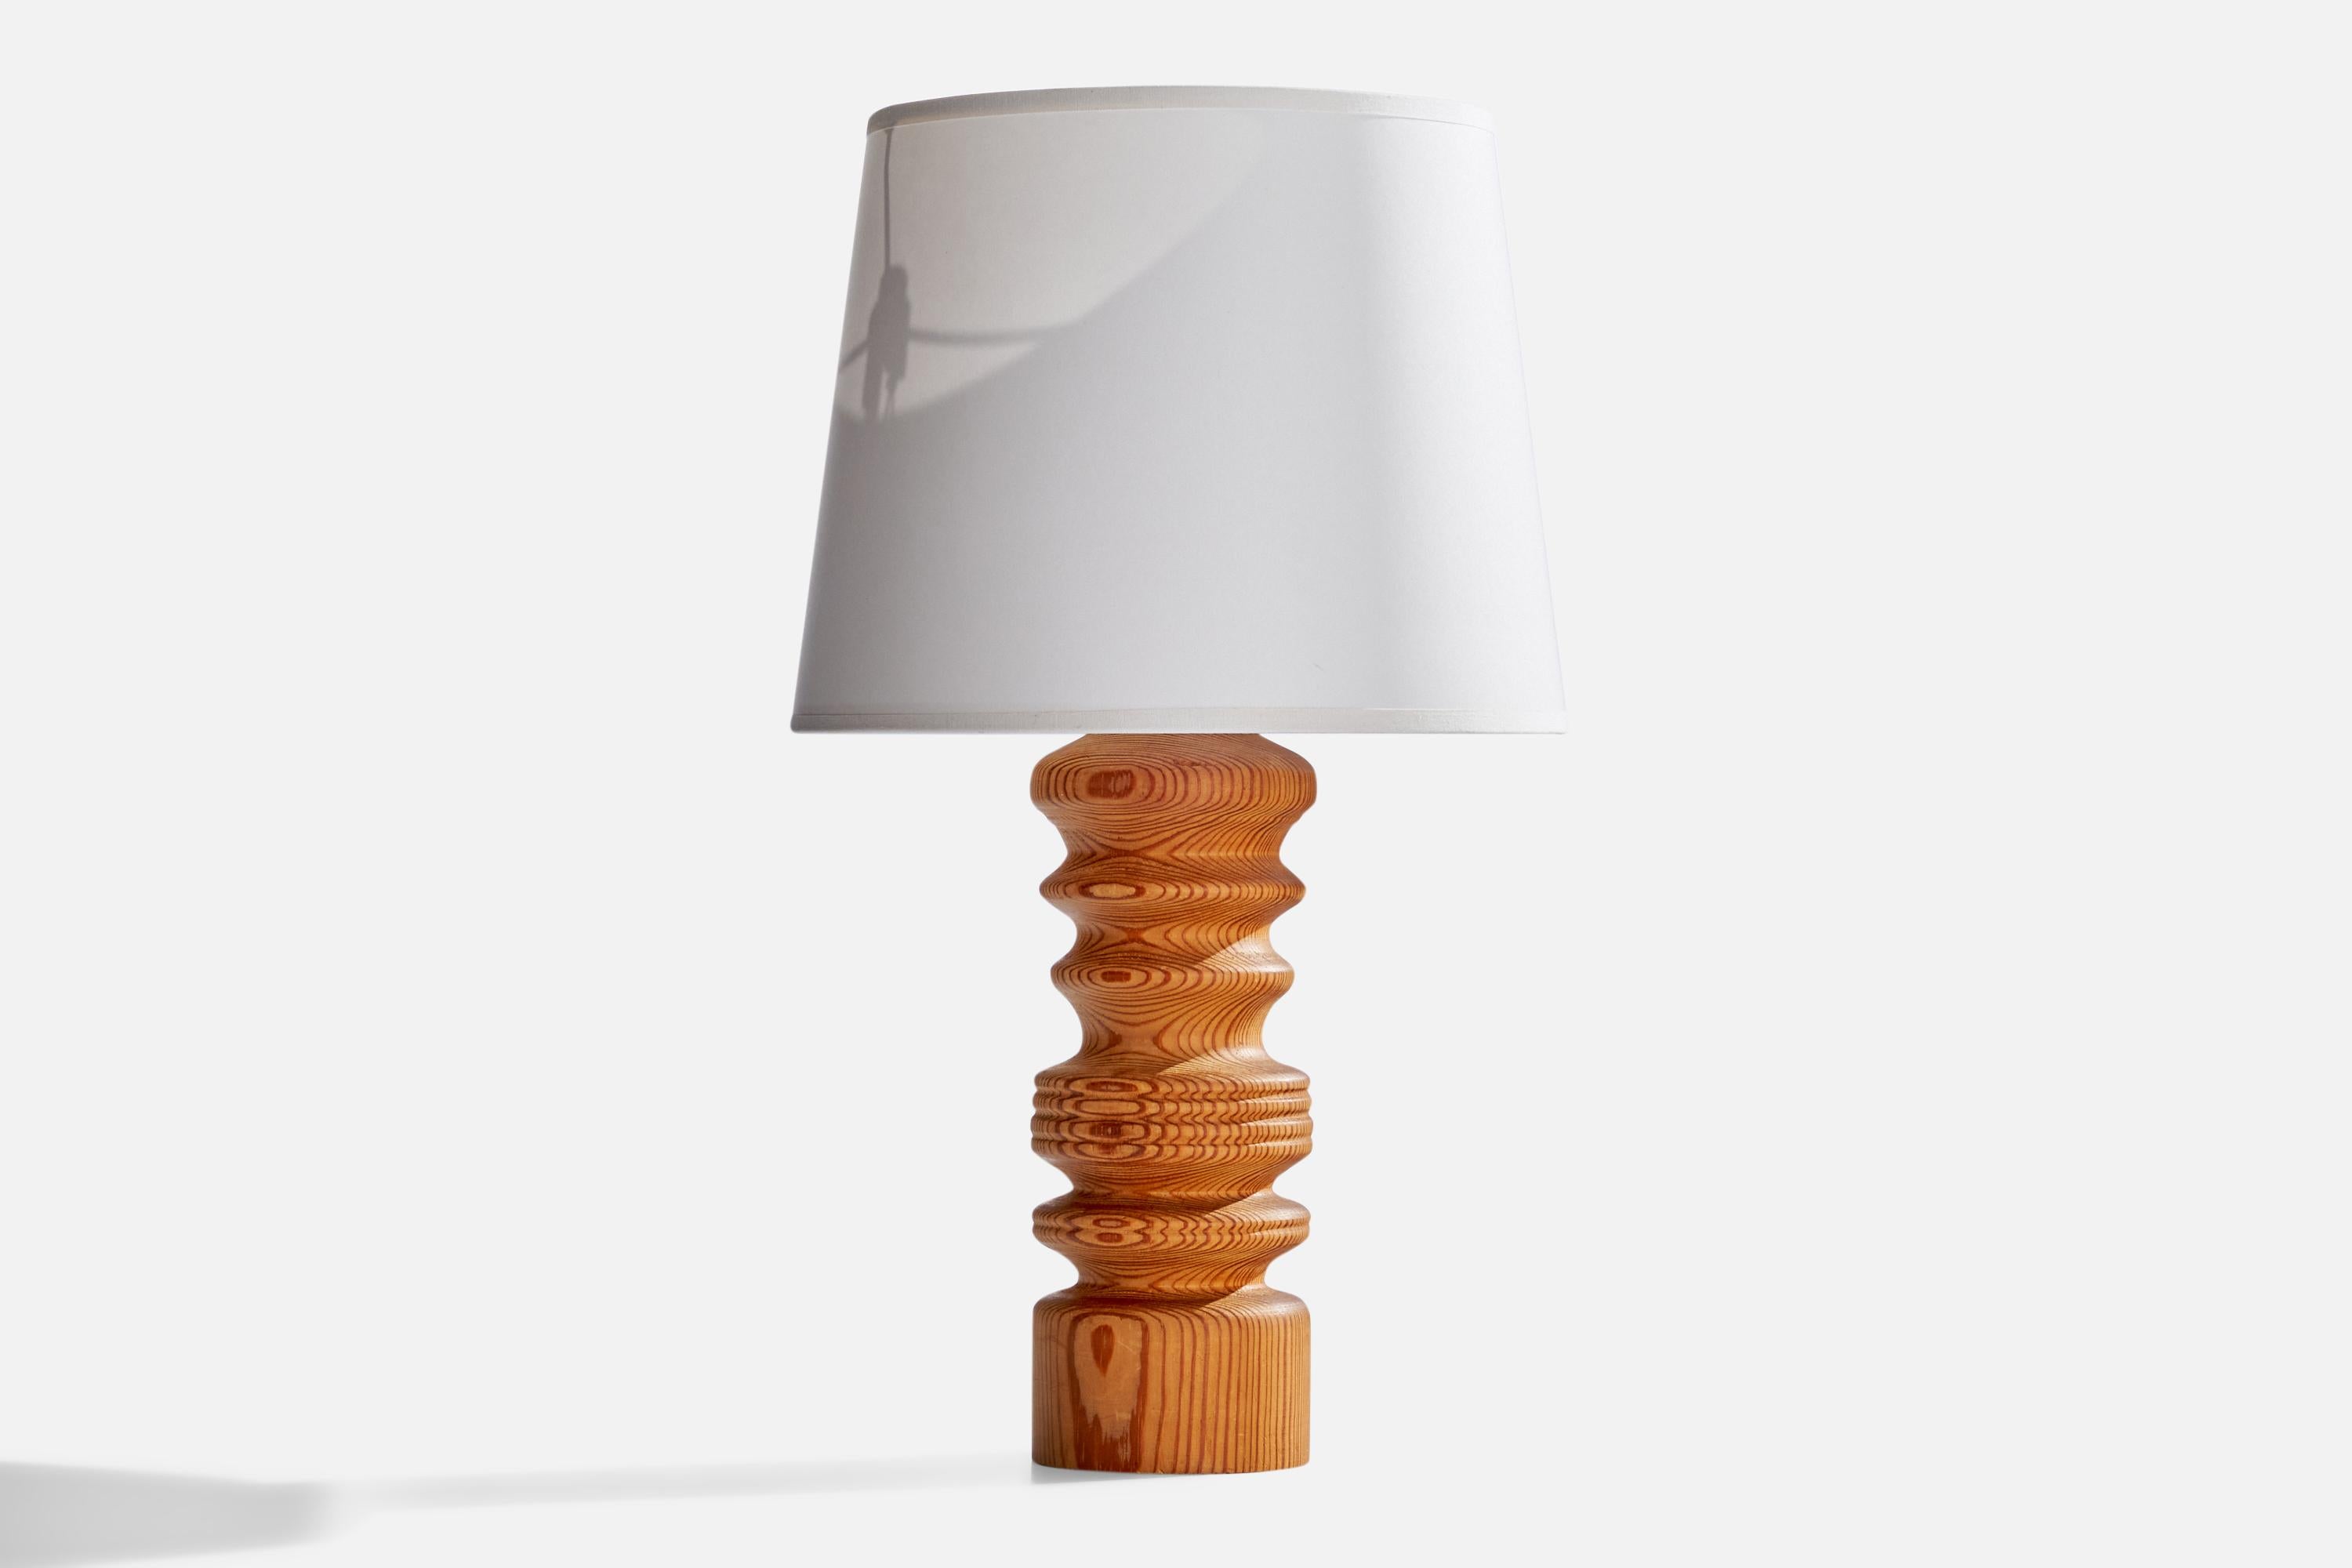 A pine table lamp designed and produced in Sweden, c. 1970s.

Dimensions of Lamp (inches): 12”  H x 3.5”  Diameter
Dimensions of Shade (inches): 8” Top Diameter x 10” Bottom Diameter x 8” H
Dimensions of Lamp with Shade (inches): 17”  H x 10”